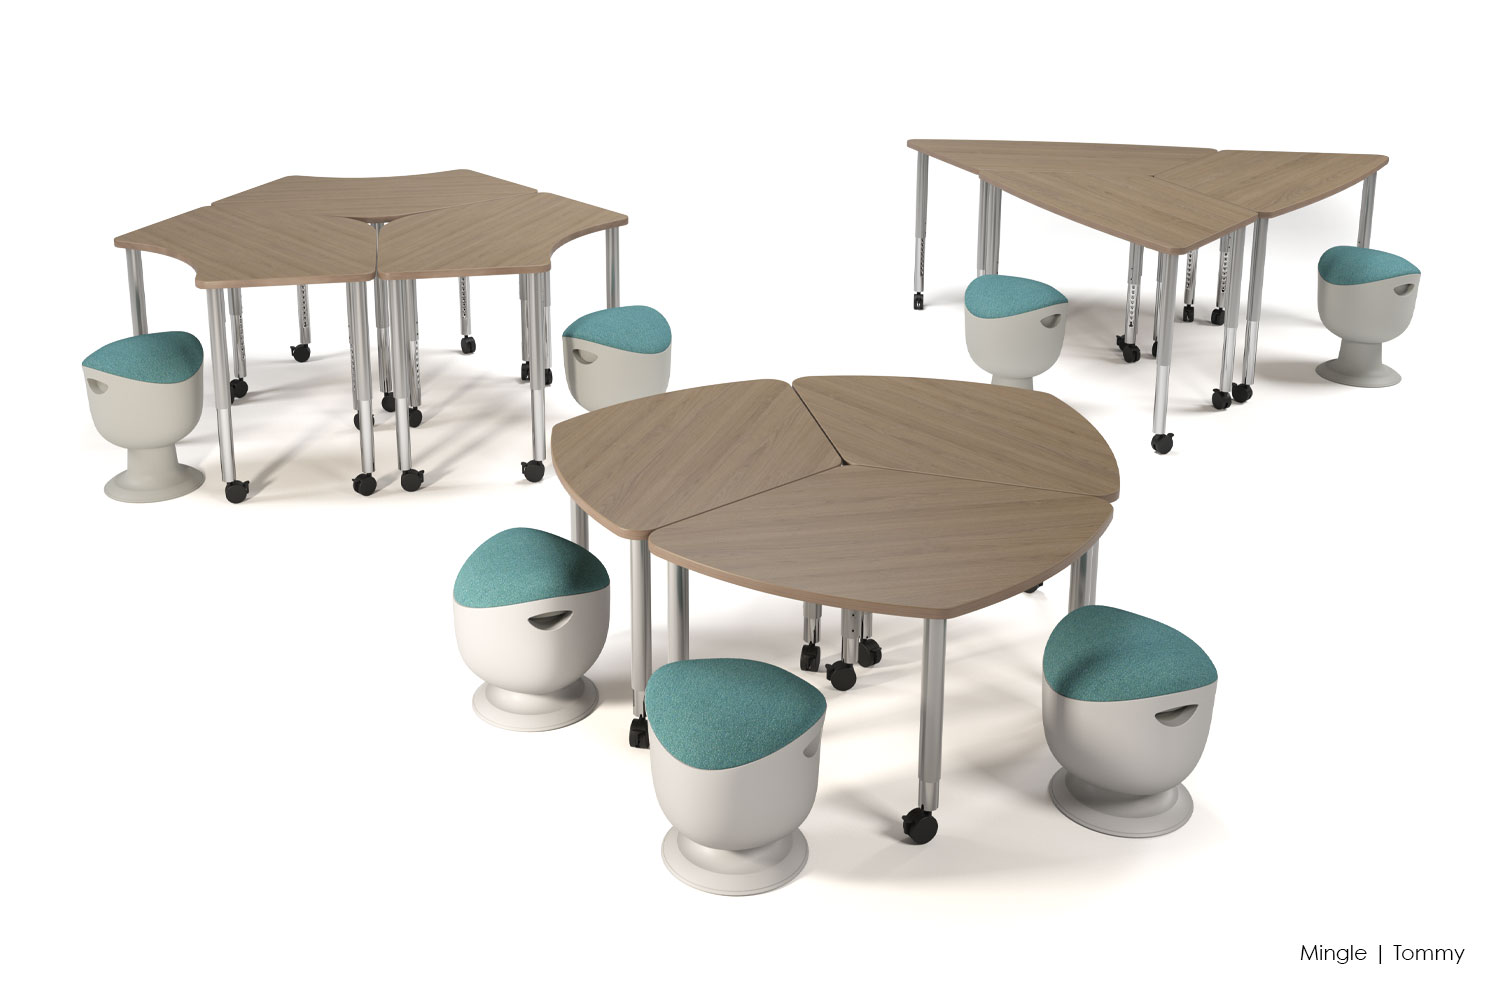 Mingle Tables and Tommy Stool Configuration Scene